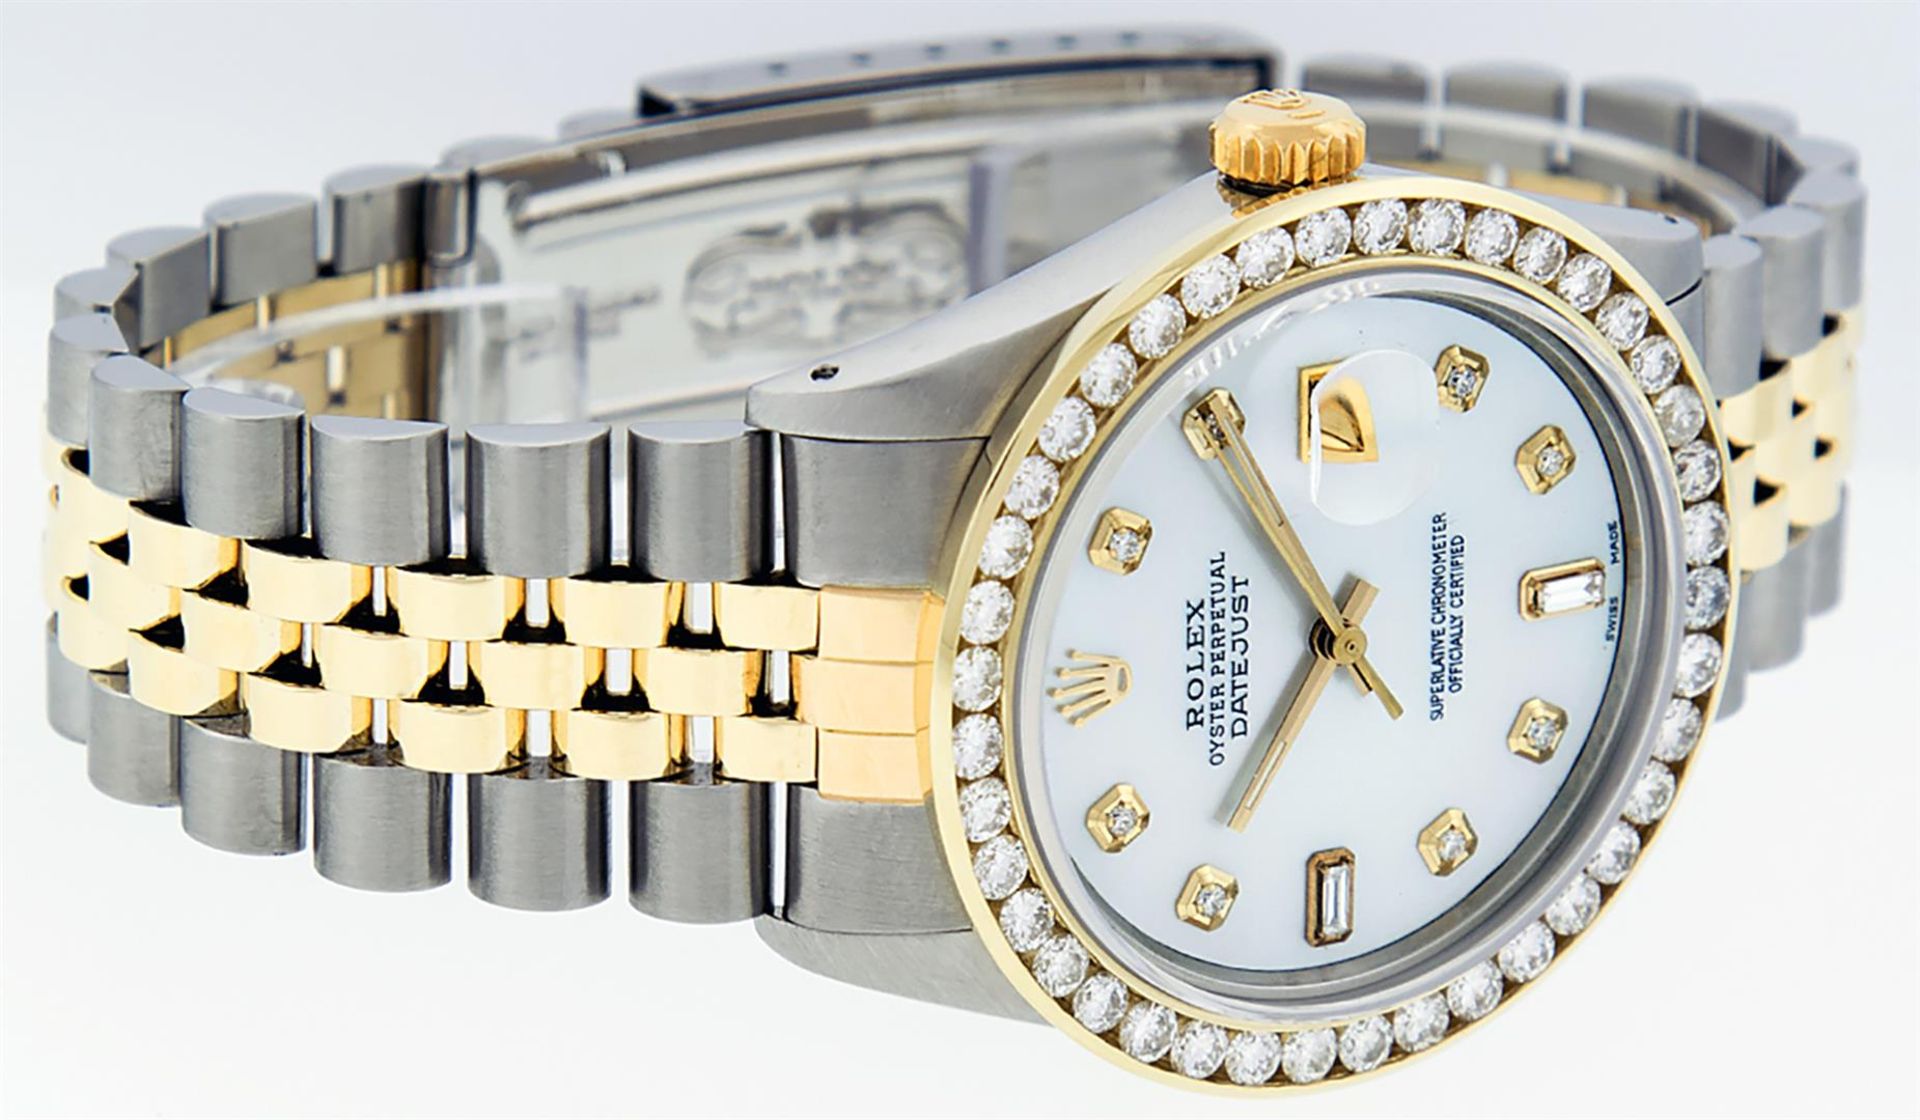 Rolex Mens 2 Tone Mother Of Pearl 3ctw Channel Set Diamond Datejust Wristwatch - Image 3 of 9